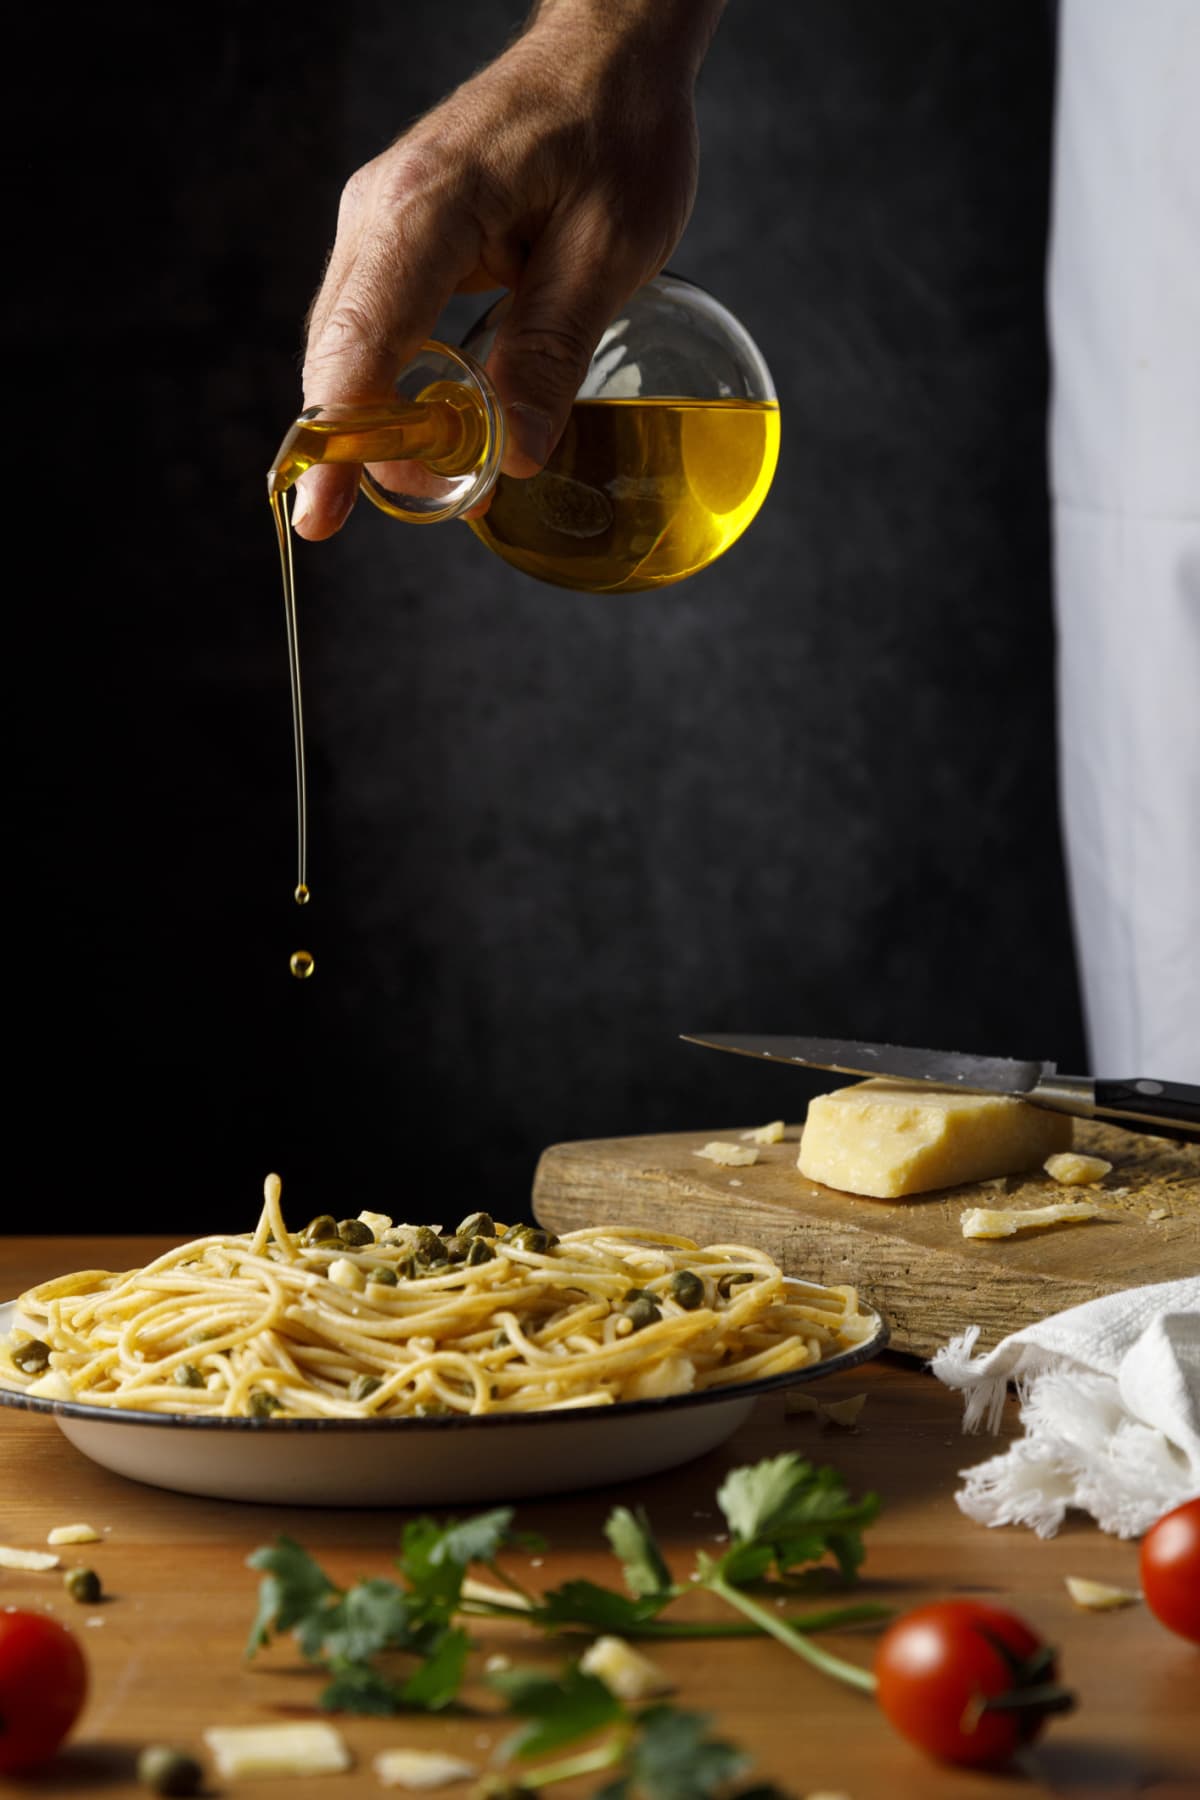 Man pouring olive oil on spaghetti on a plate